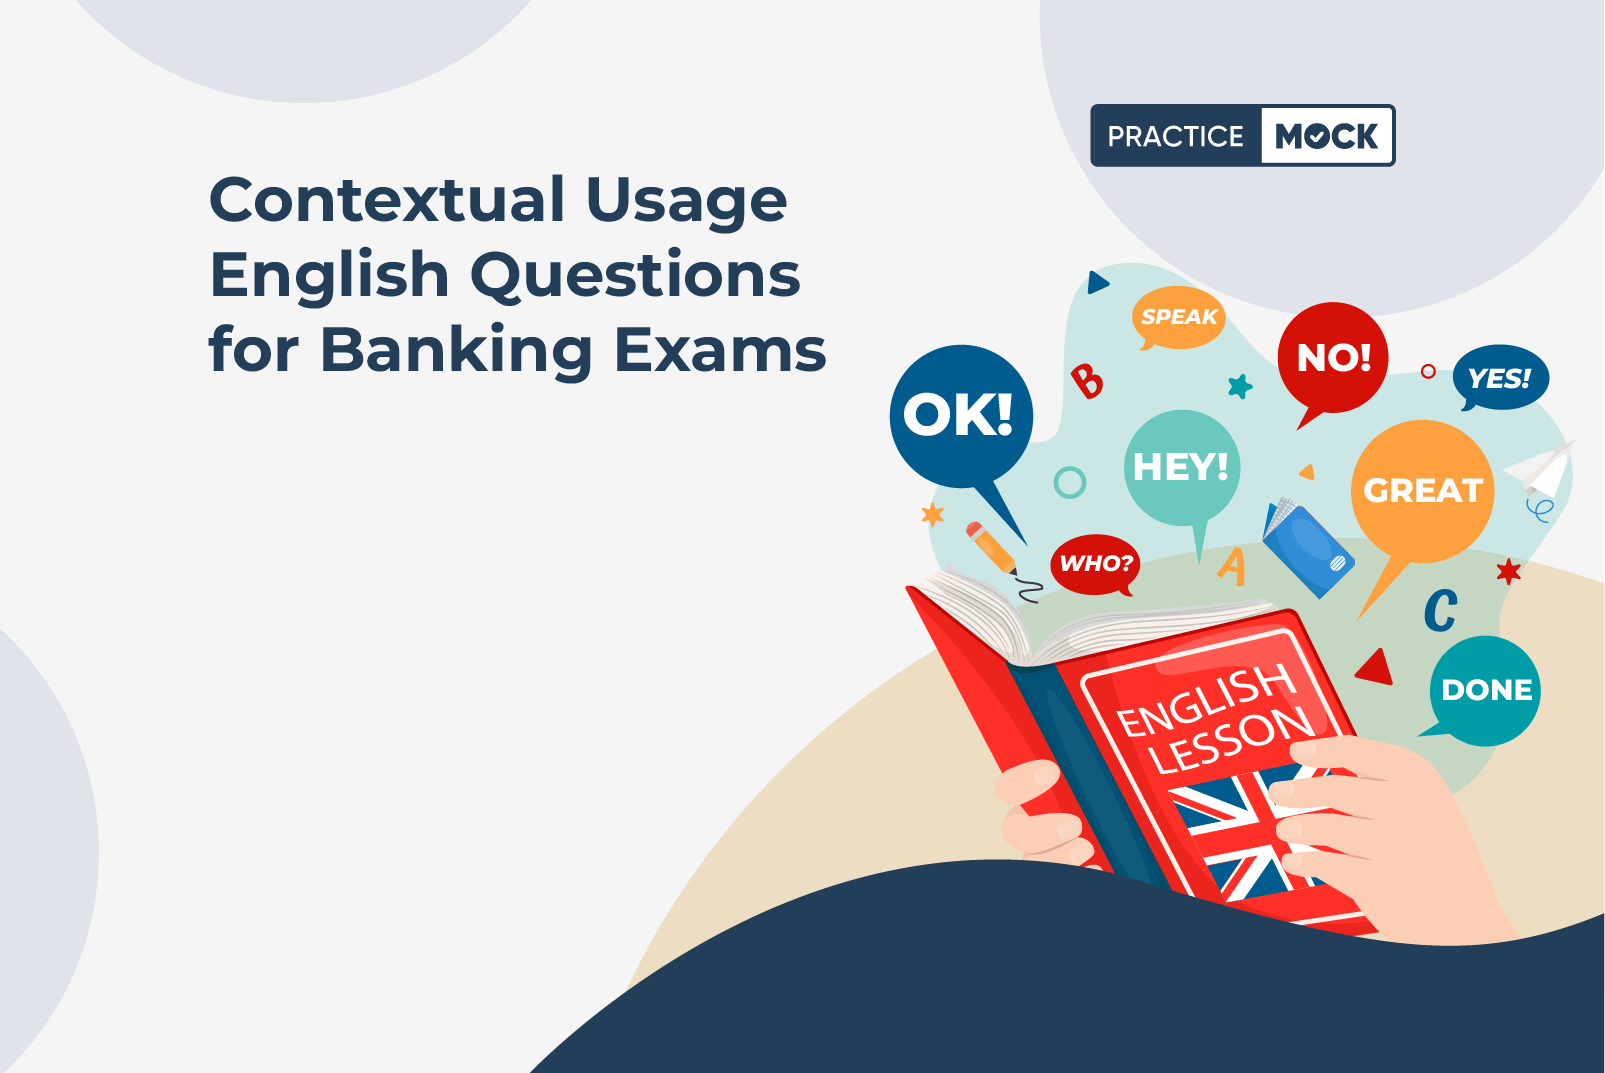 Contextual Usage English Questions for Banking Exams